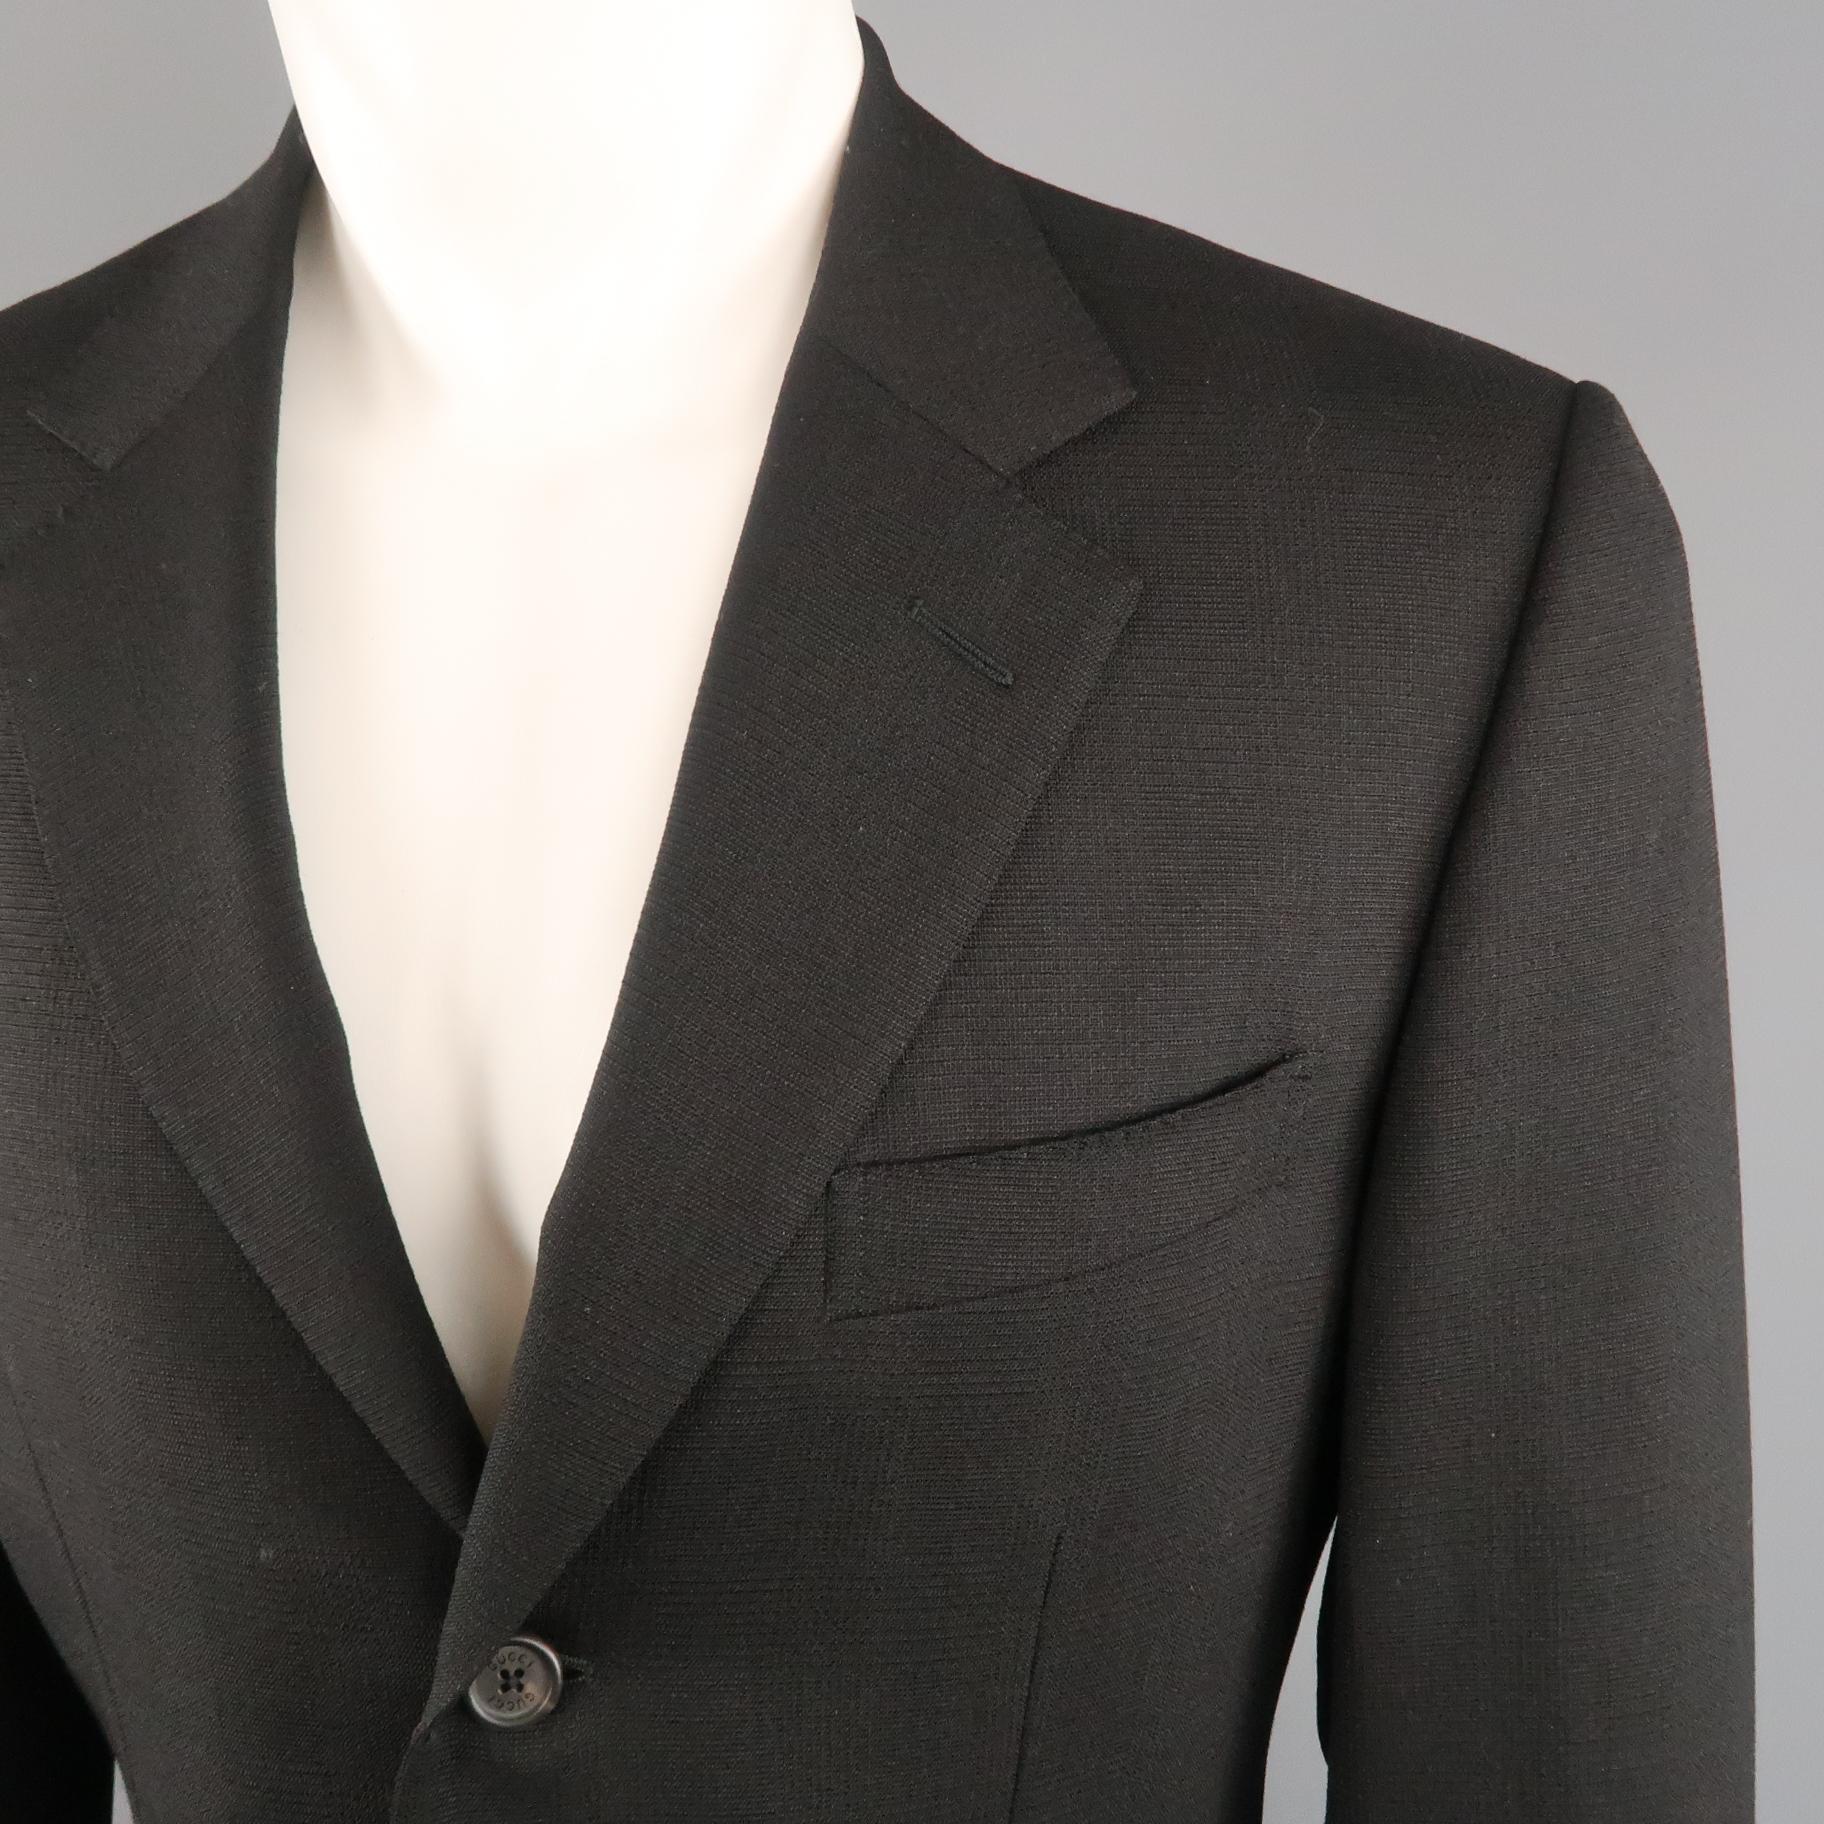 GUCCI sport coat comes in glenplaid textured wool mohair blend fabric with a notch lapel, single breasted,  three button front, and flap pockets. Made in Italy.
 
Excellent Pre-Owned Condition.
Marked: IT 46
 
Measurements:
 
Shoulder: 18 in.
Chest: